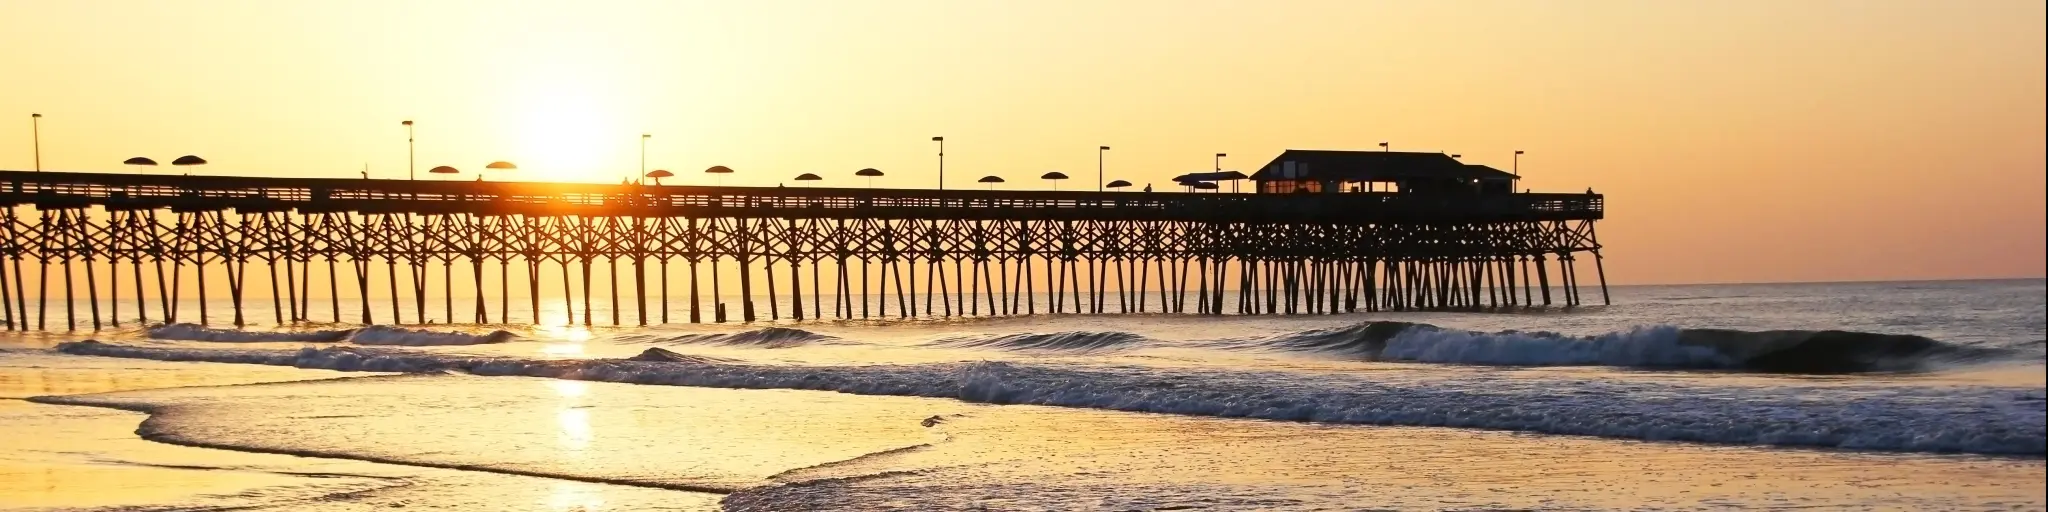 Sunrise over the Ocean. Atlantic Ocean view with a pier in Myrtle Beach, South Carolina, USA.